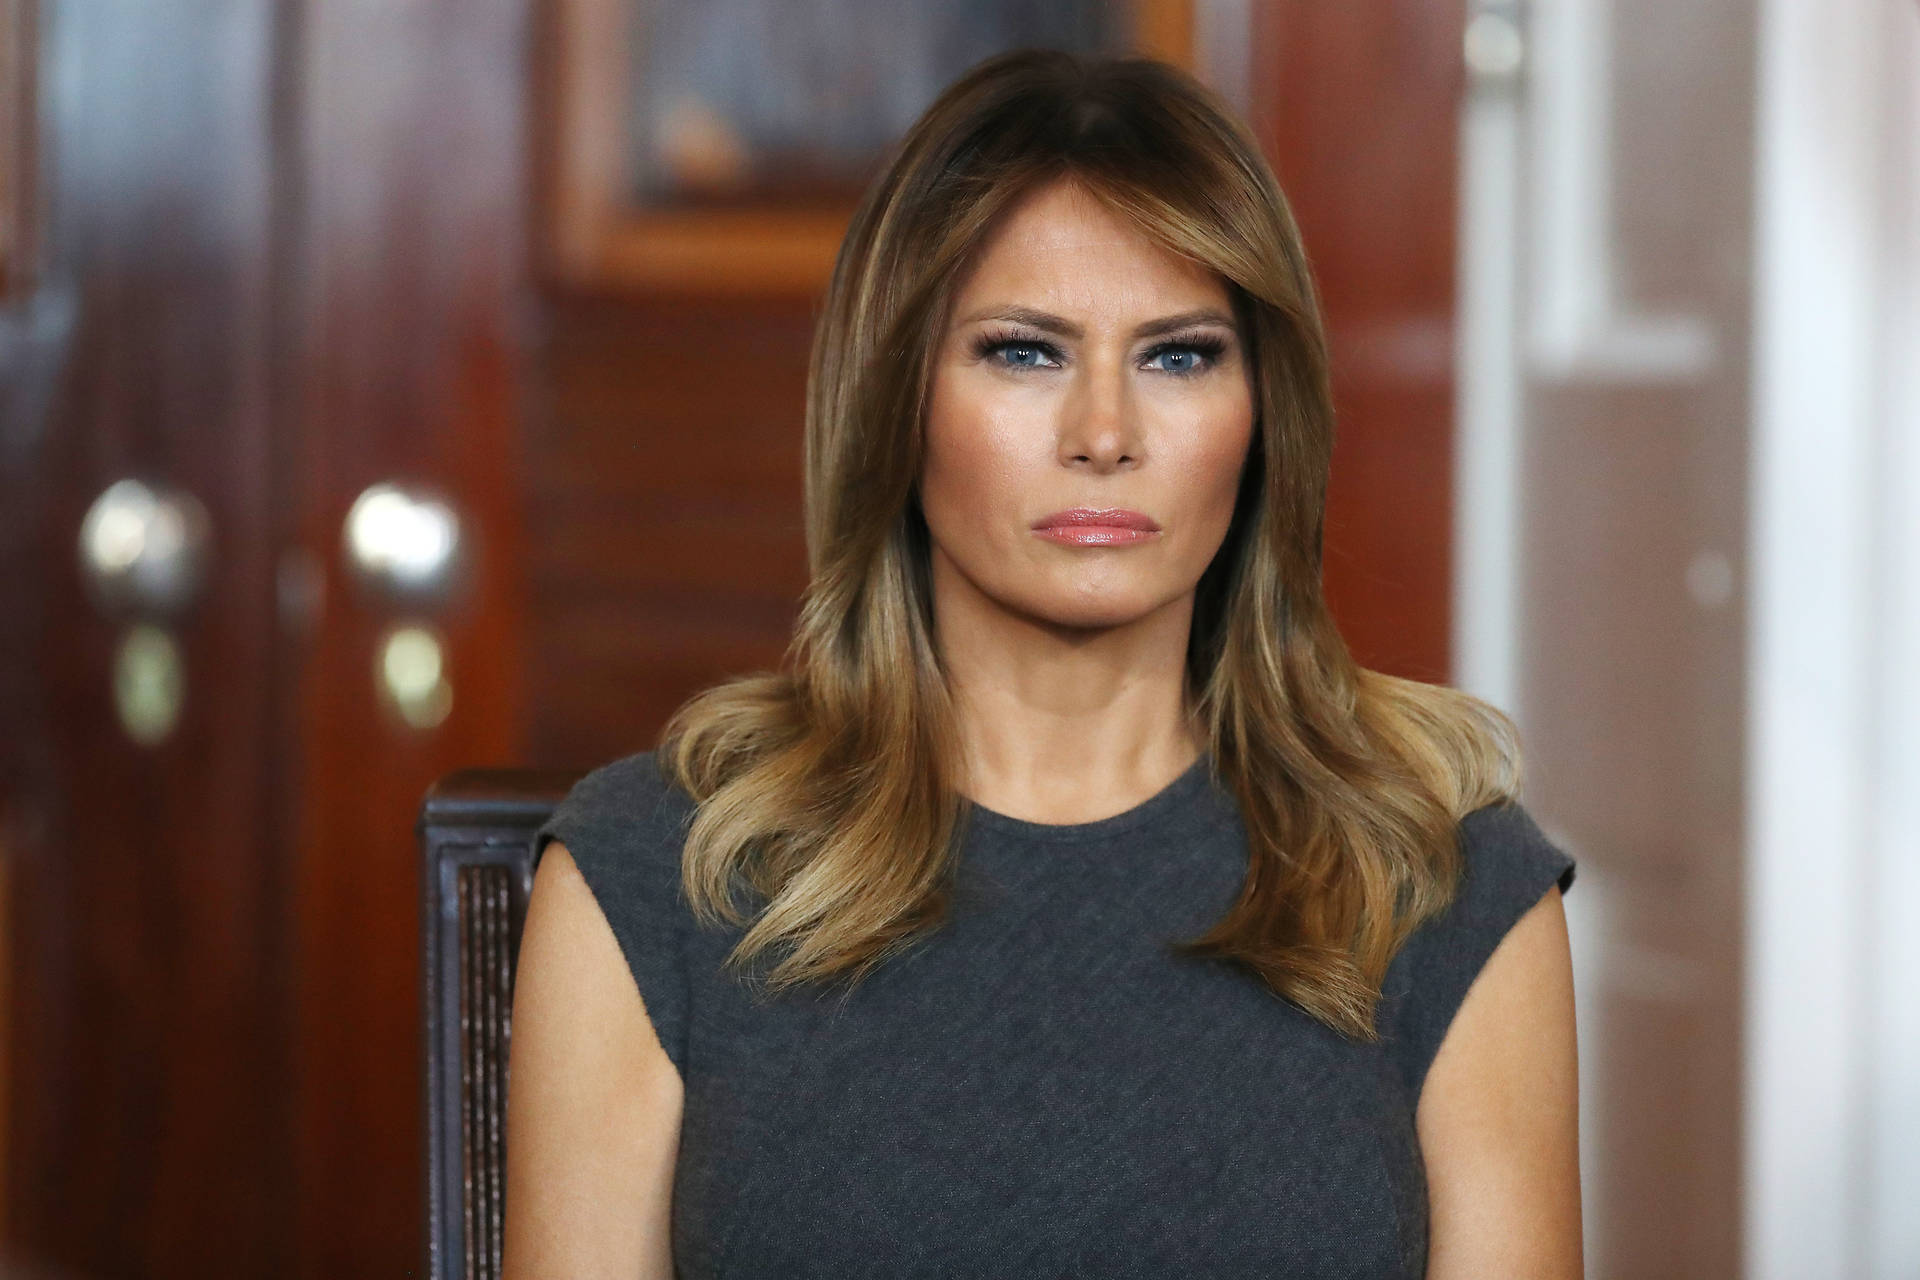 Melania Trump's skin-colored leather pants cause confusion